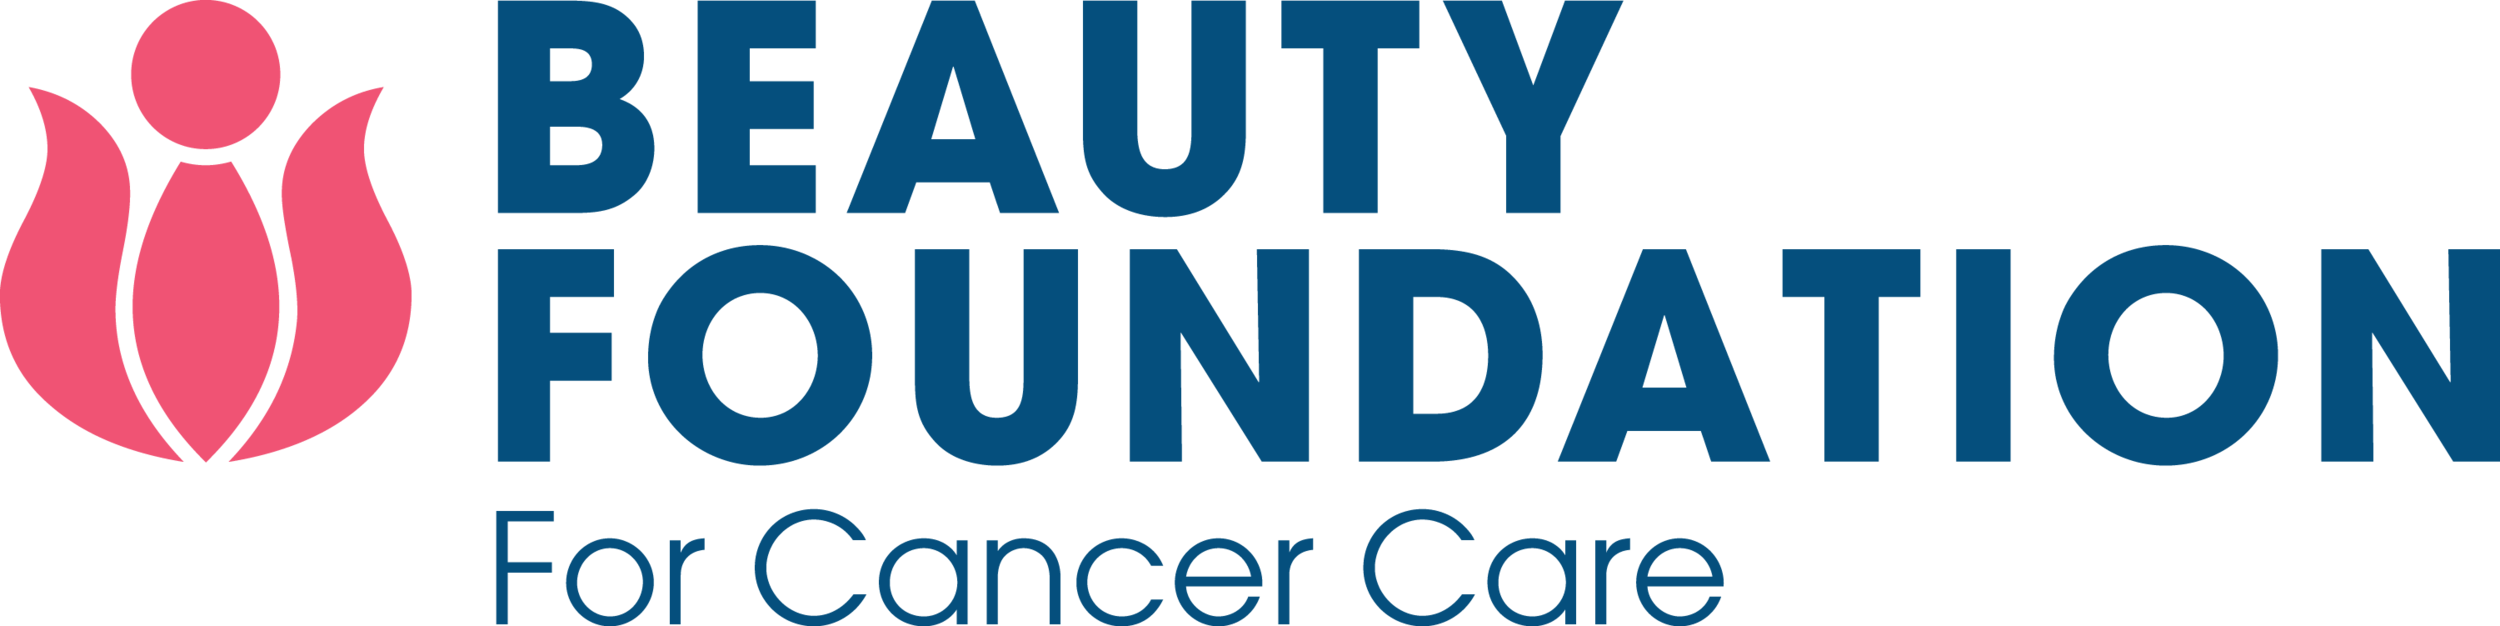 The Beauty Foundation For Cancer Care